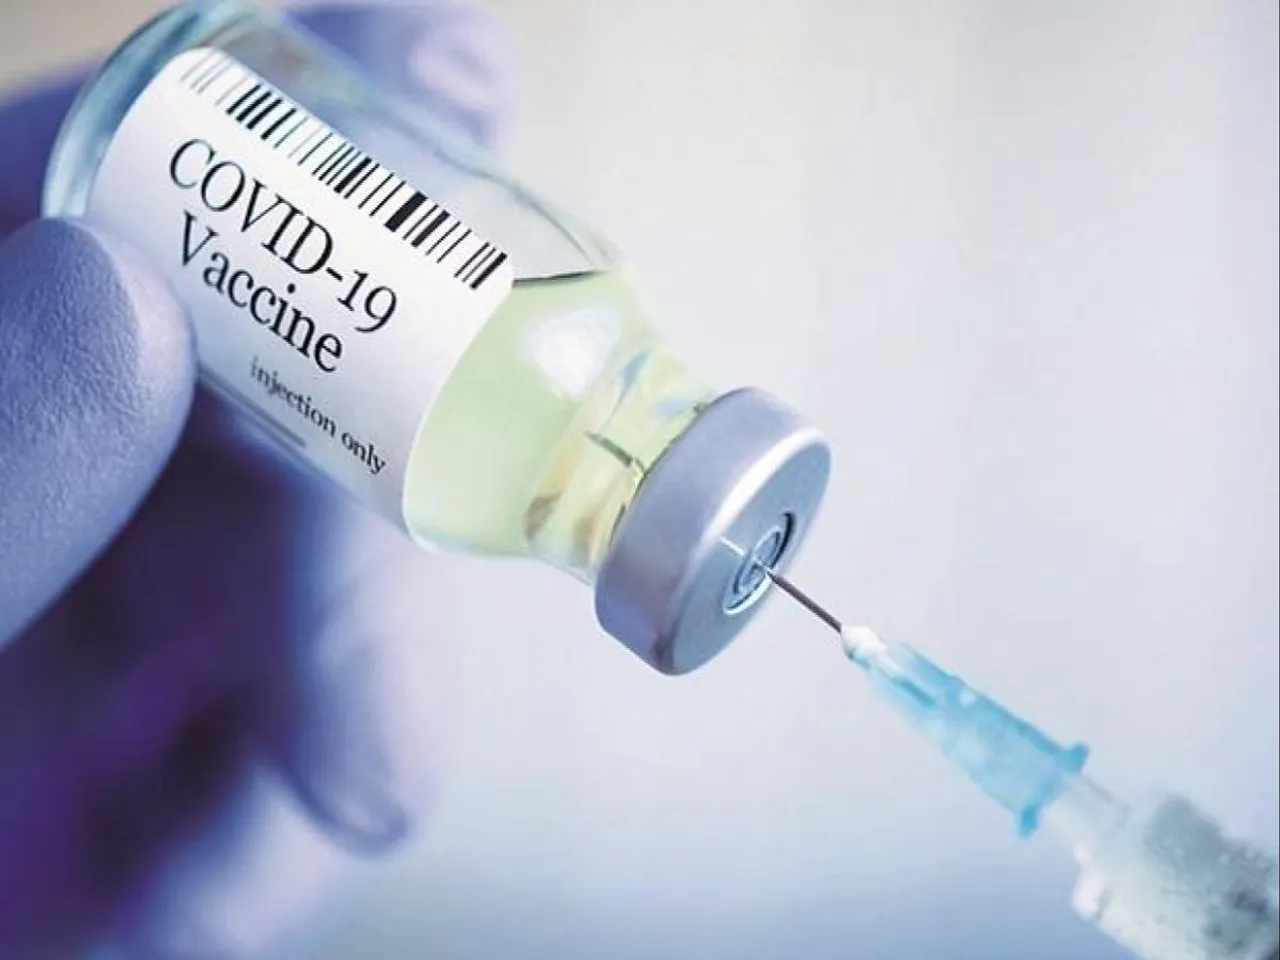 India Administered 10 Million COVID-19 Vaccine Doses In 34 Days